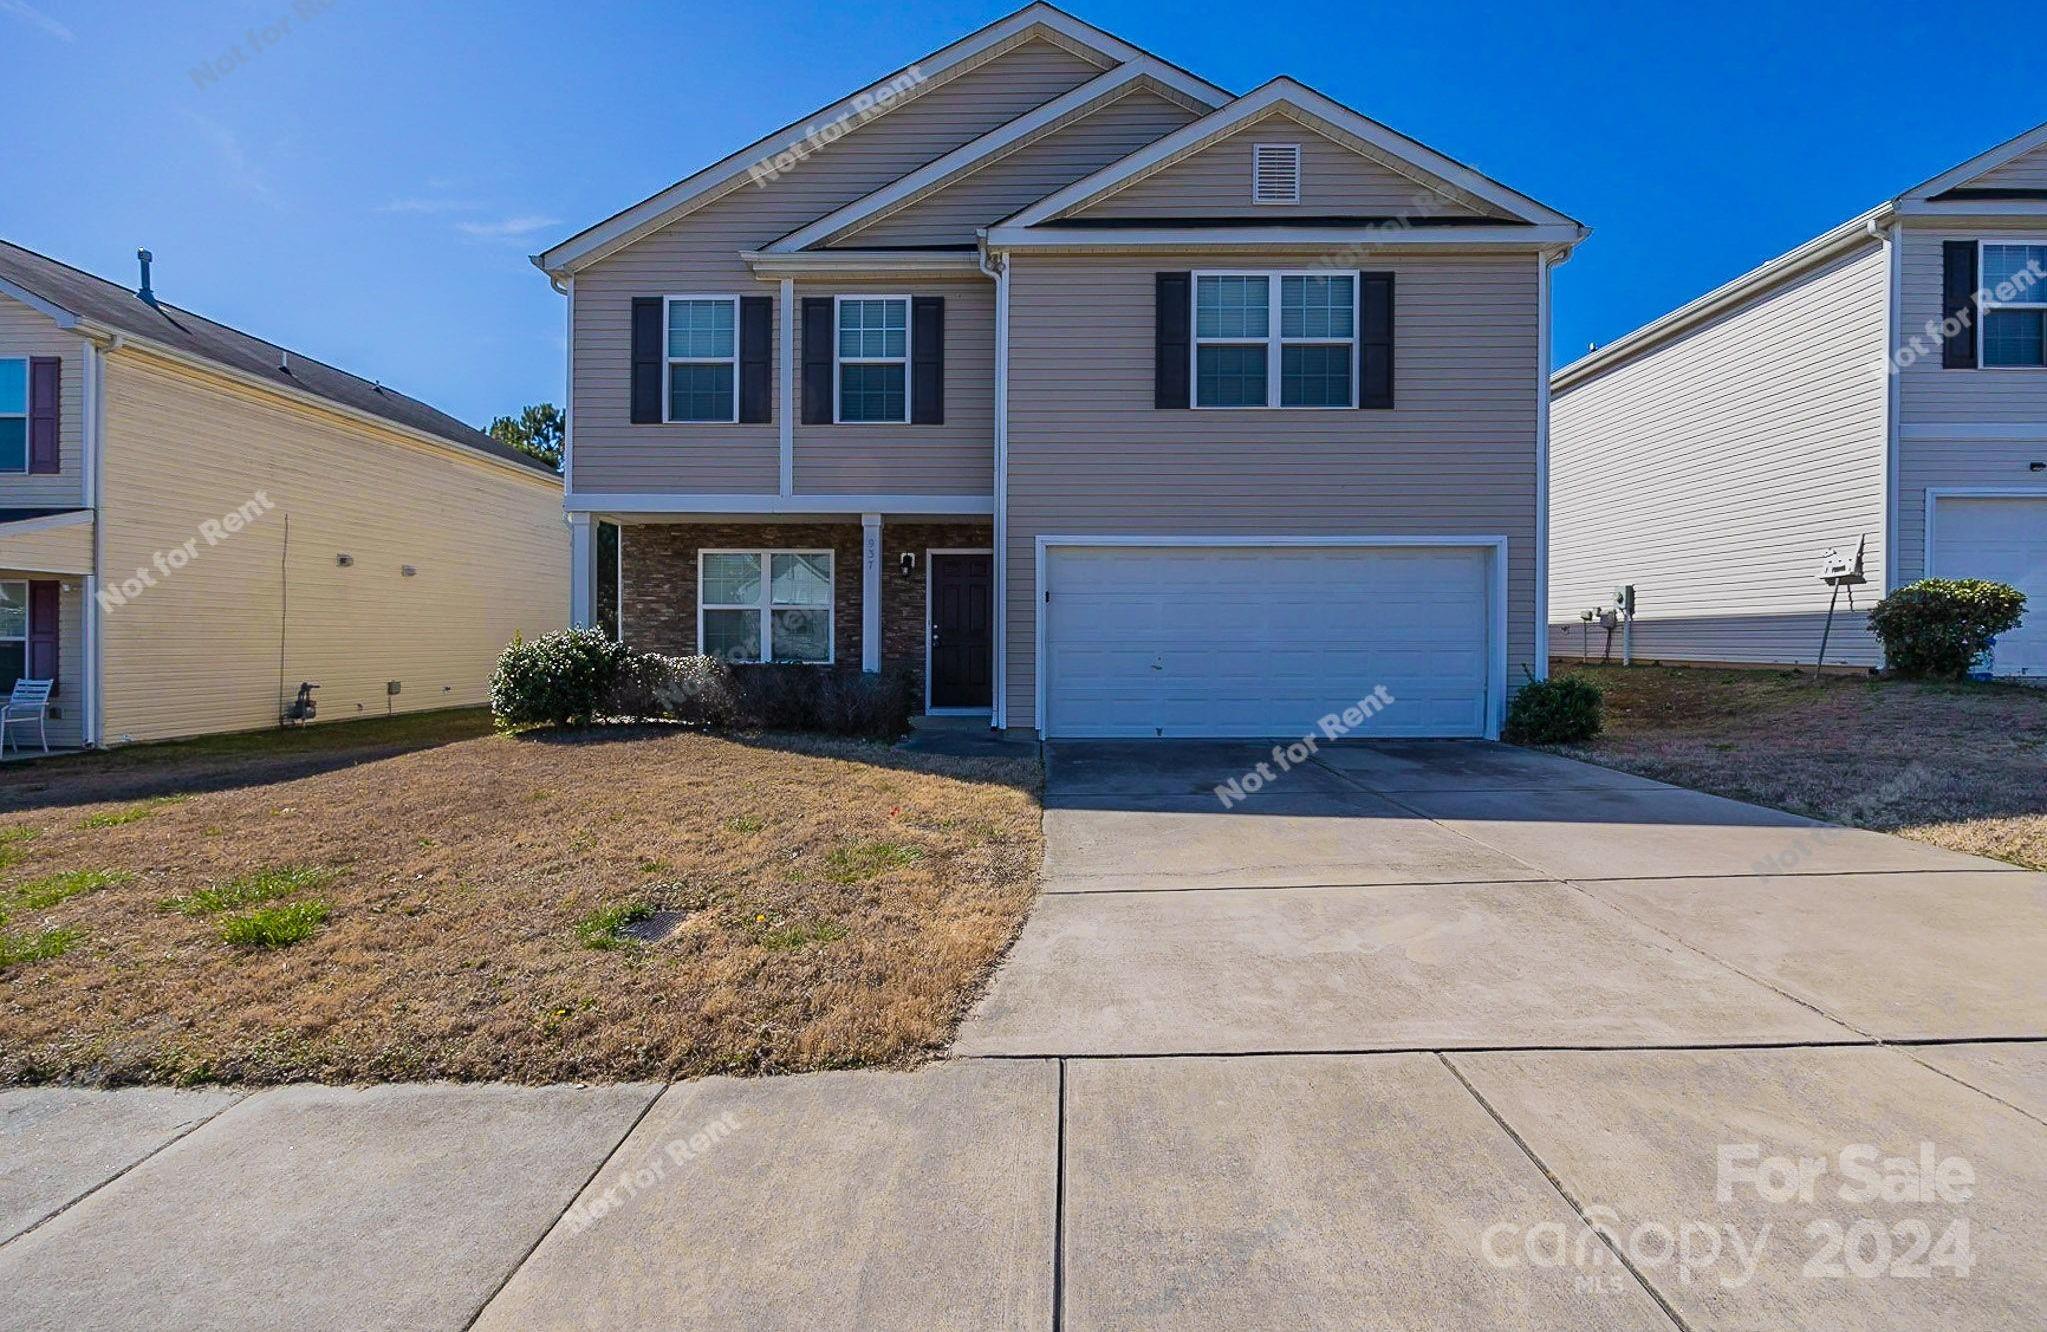 Photo one of 937 Cassidy Dr Gastonia NC 28054 | MLS 4112170